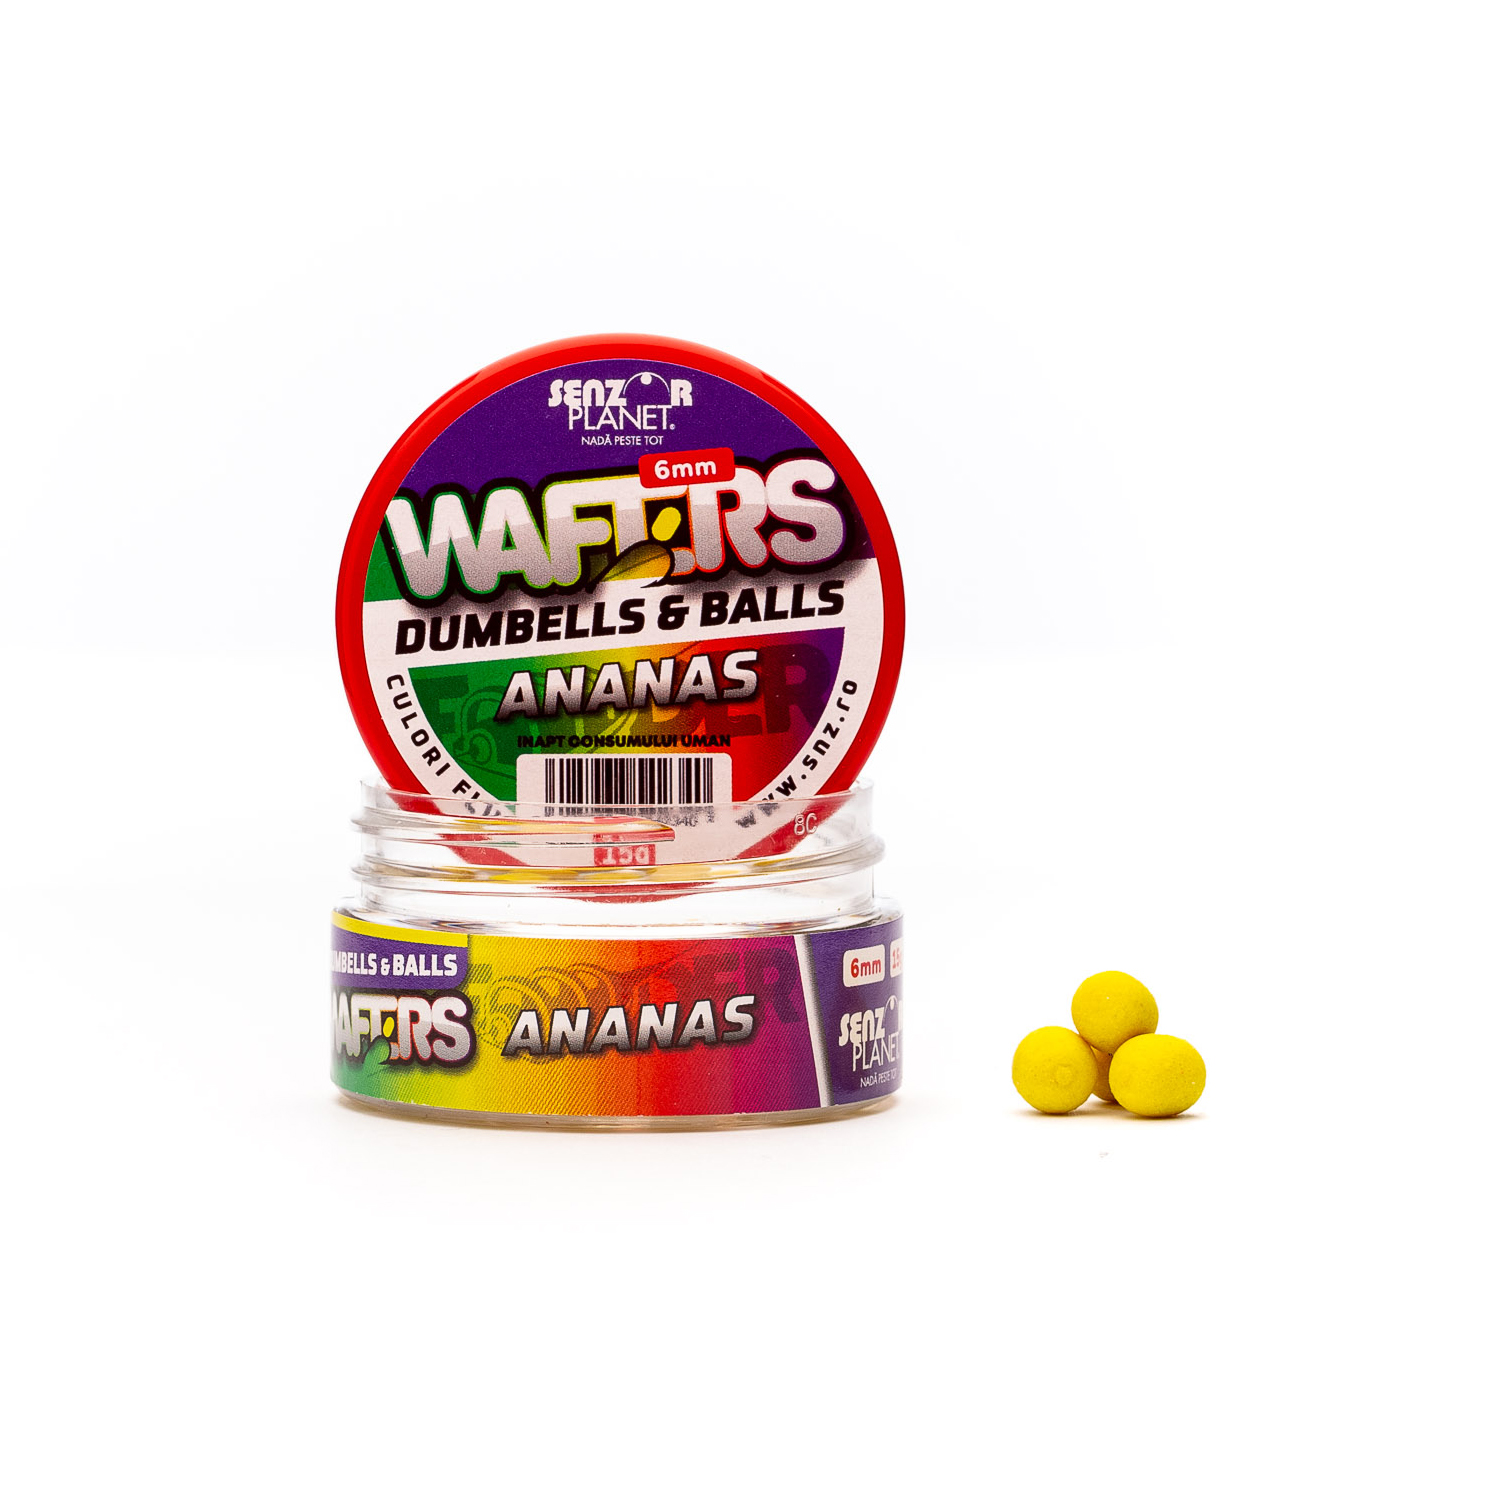 WAFTERS DUMBELLS & BALLS ANANAS 6mm 15g